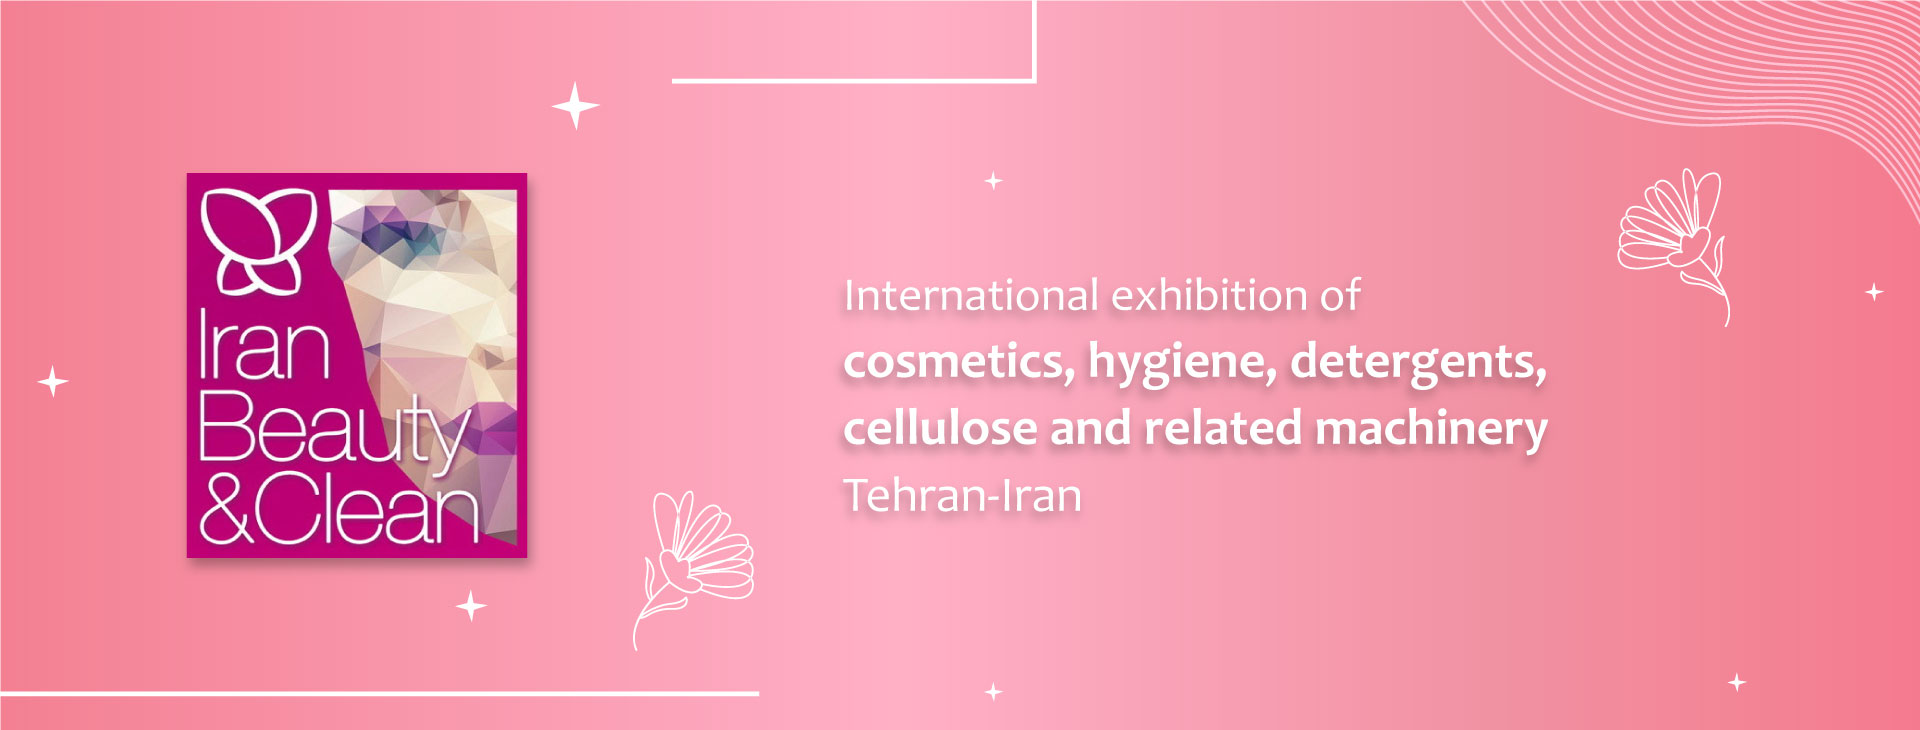 International Exhibition of Cosmetics, hygiene, detergents and related machinery Tehran-Iran